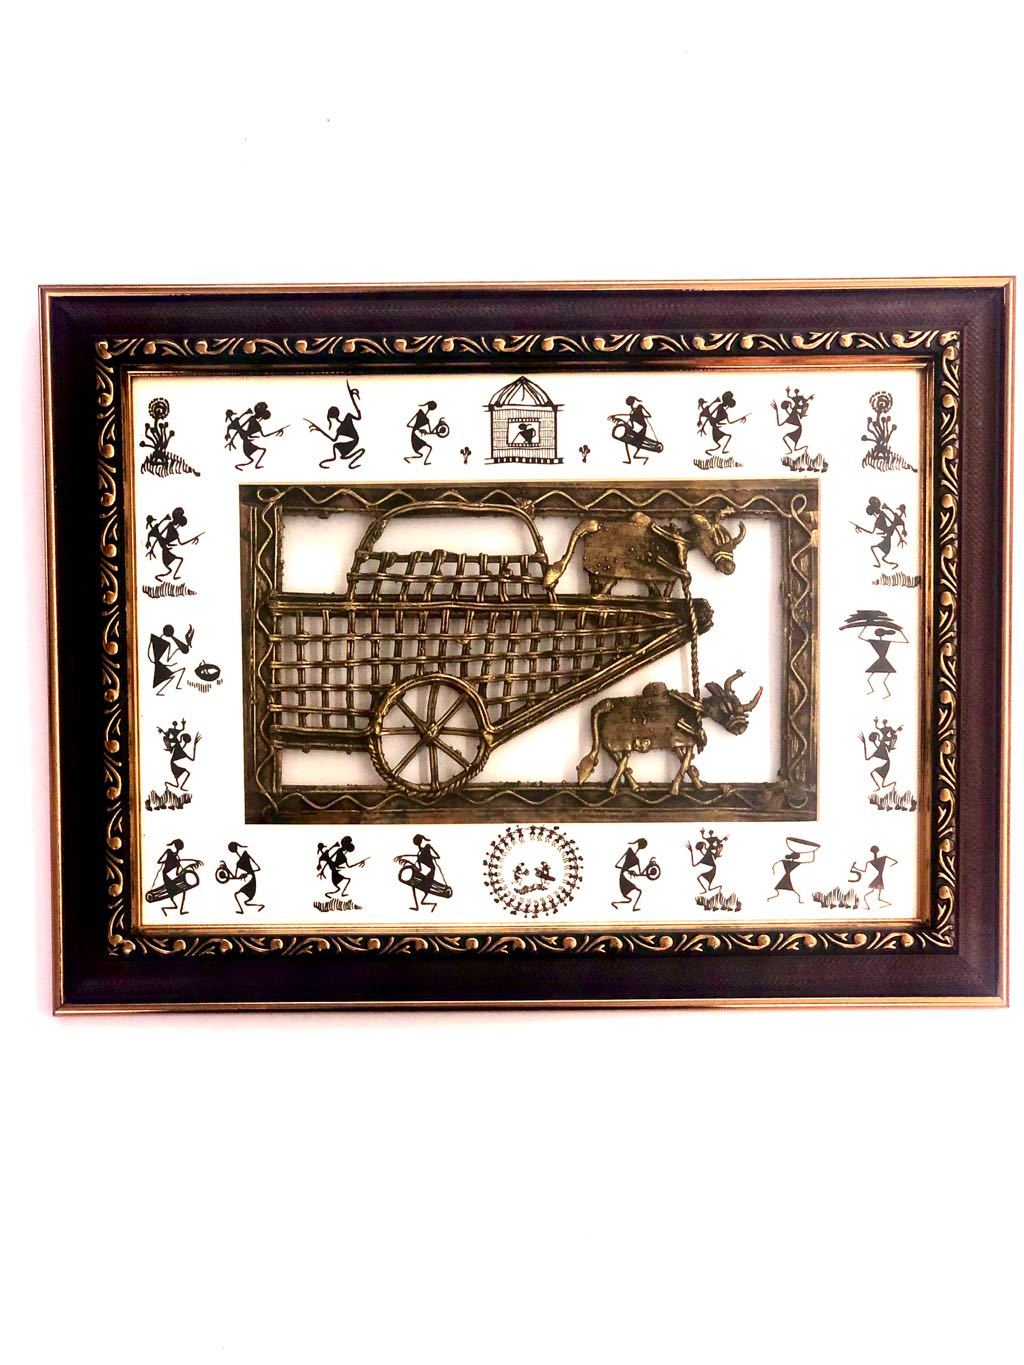 Dhokra Art Based On Crops Harvesting In Farms By Bullocks Frame By Tamrapatra